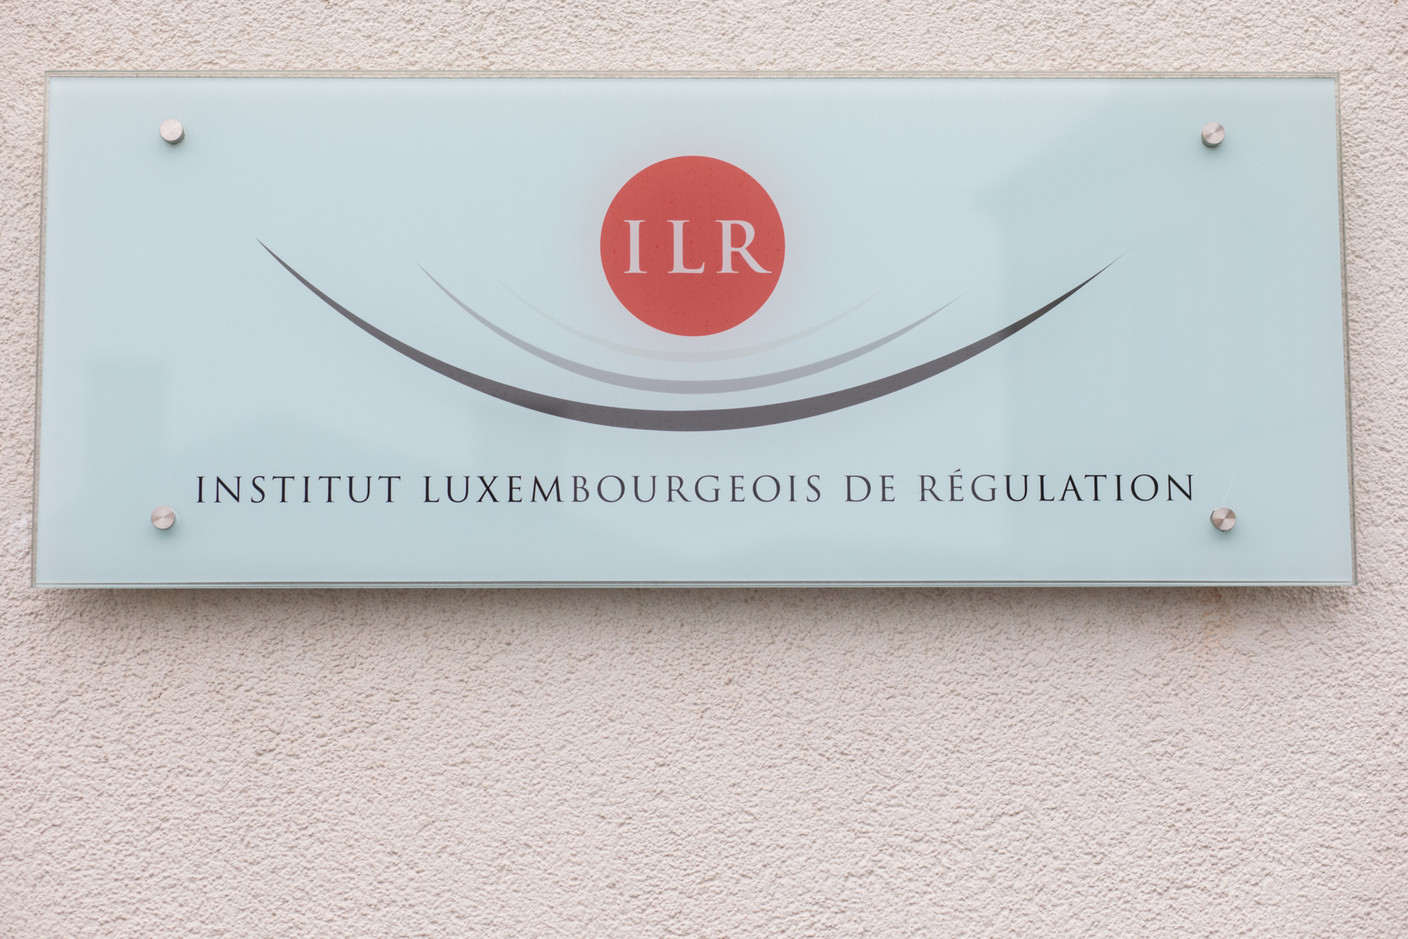 The ILR has received its 1,000 case since being introduced in 2011 Photo: Matic Zorman / Maison Moderne